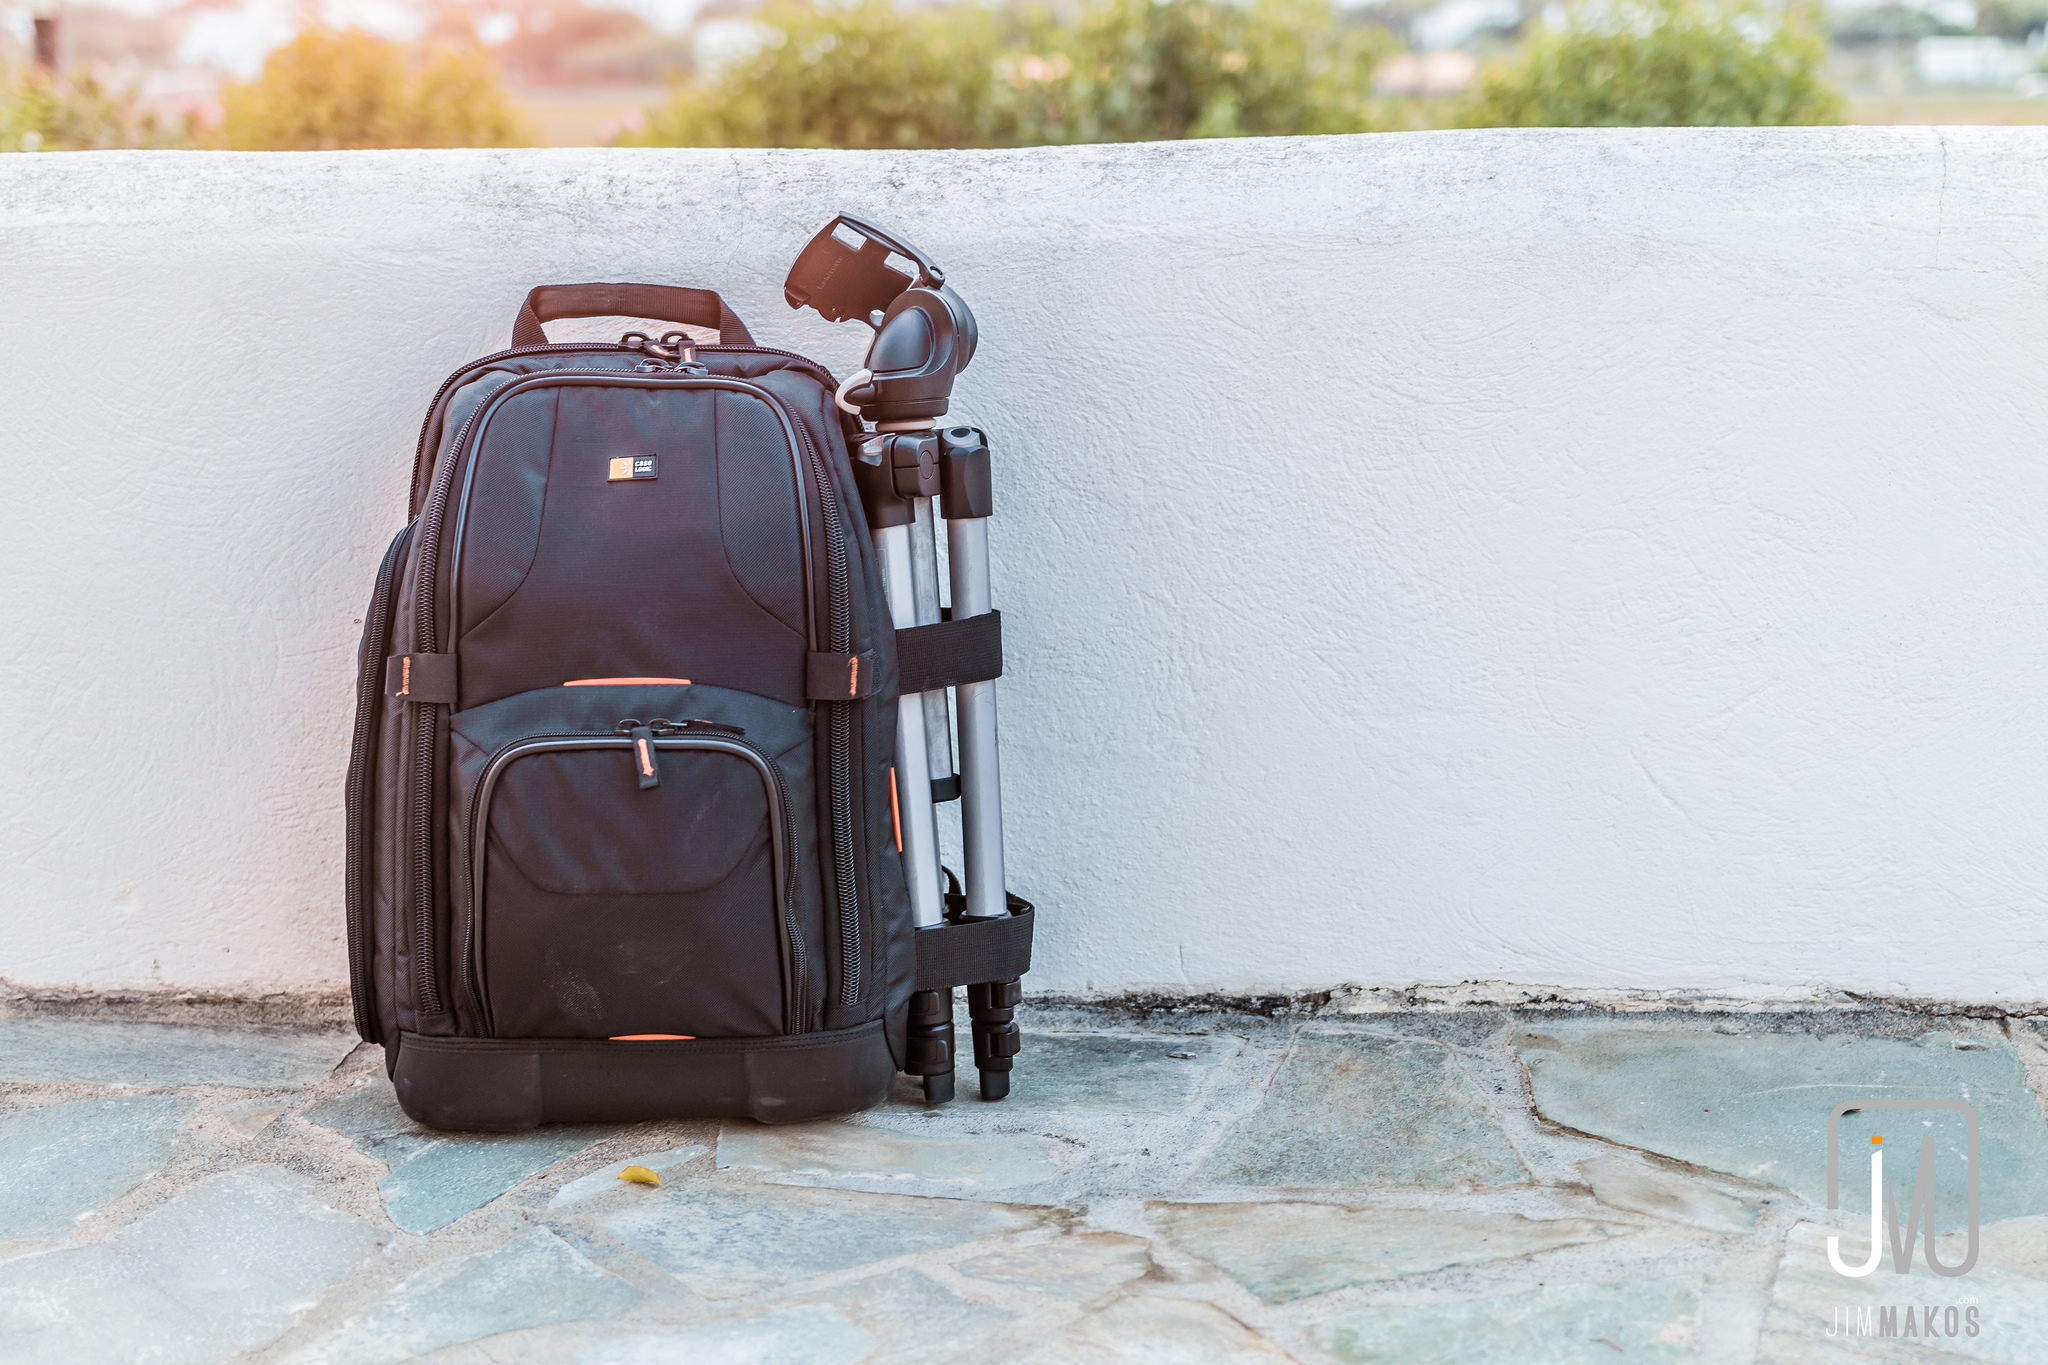 Gathering Your Tech Gear to Film Abroad